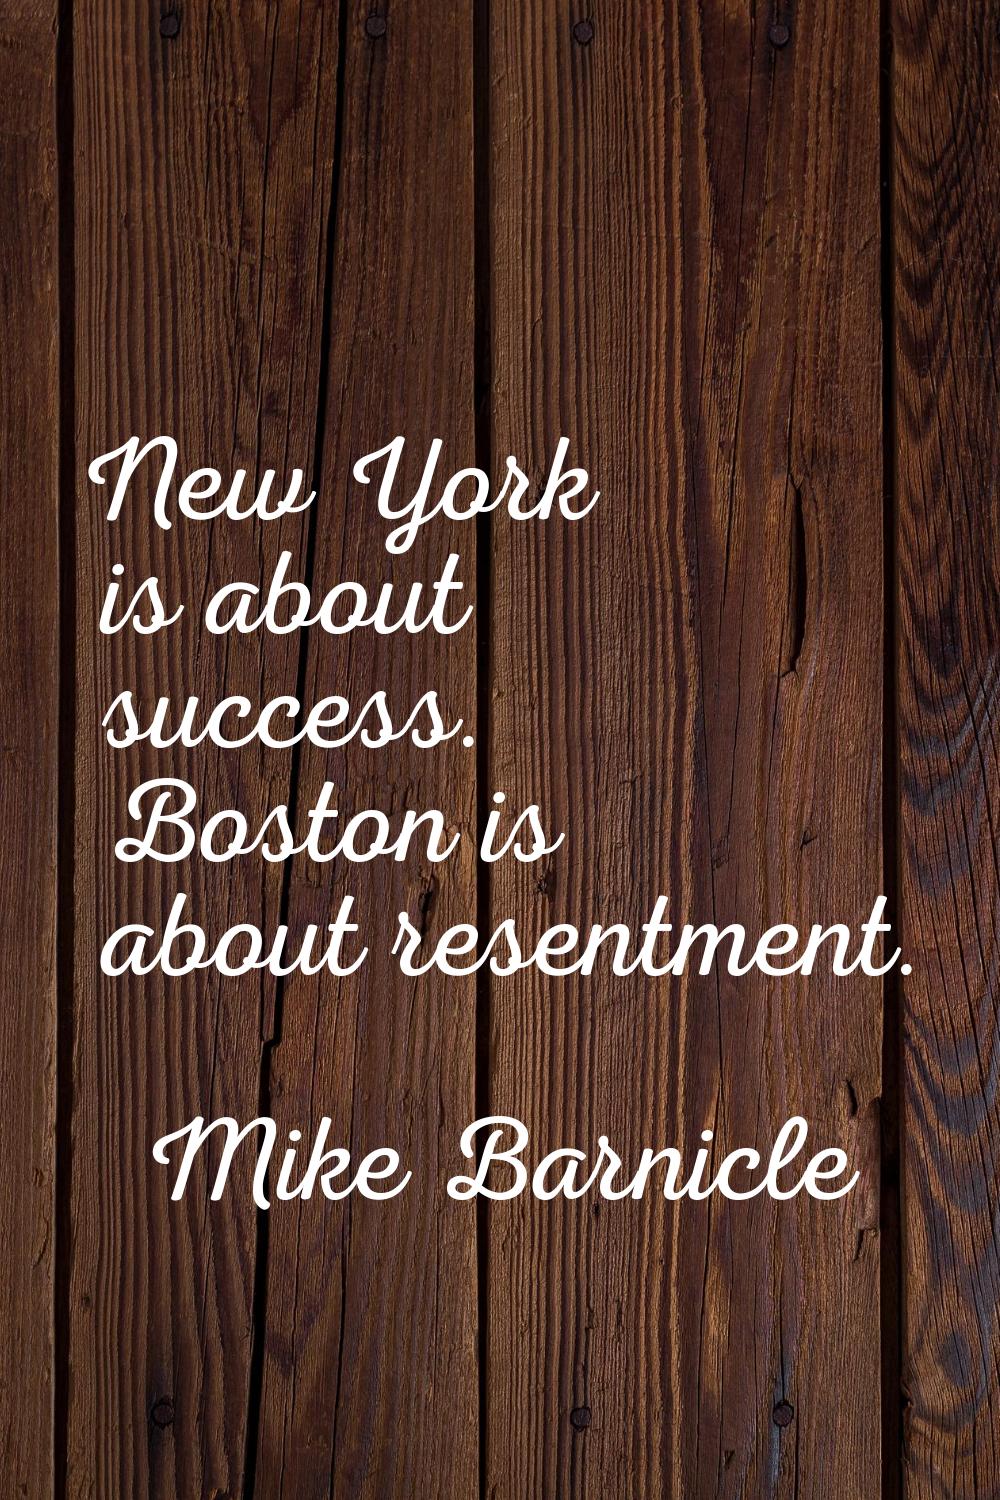 New York is about success. Boston is about resentment.